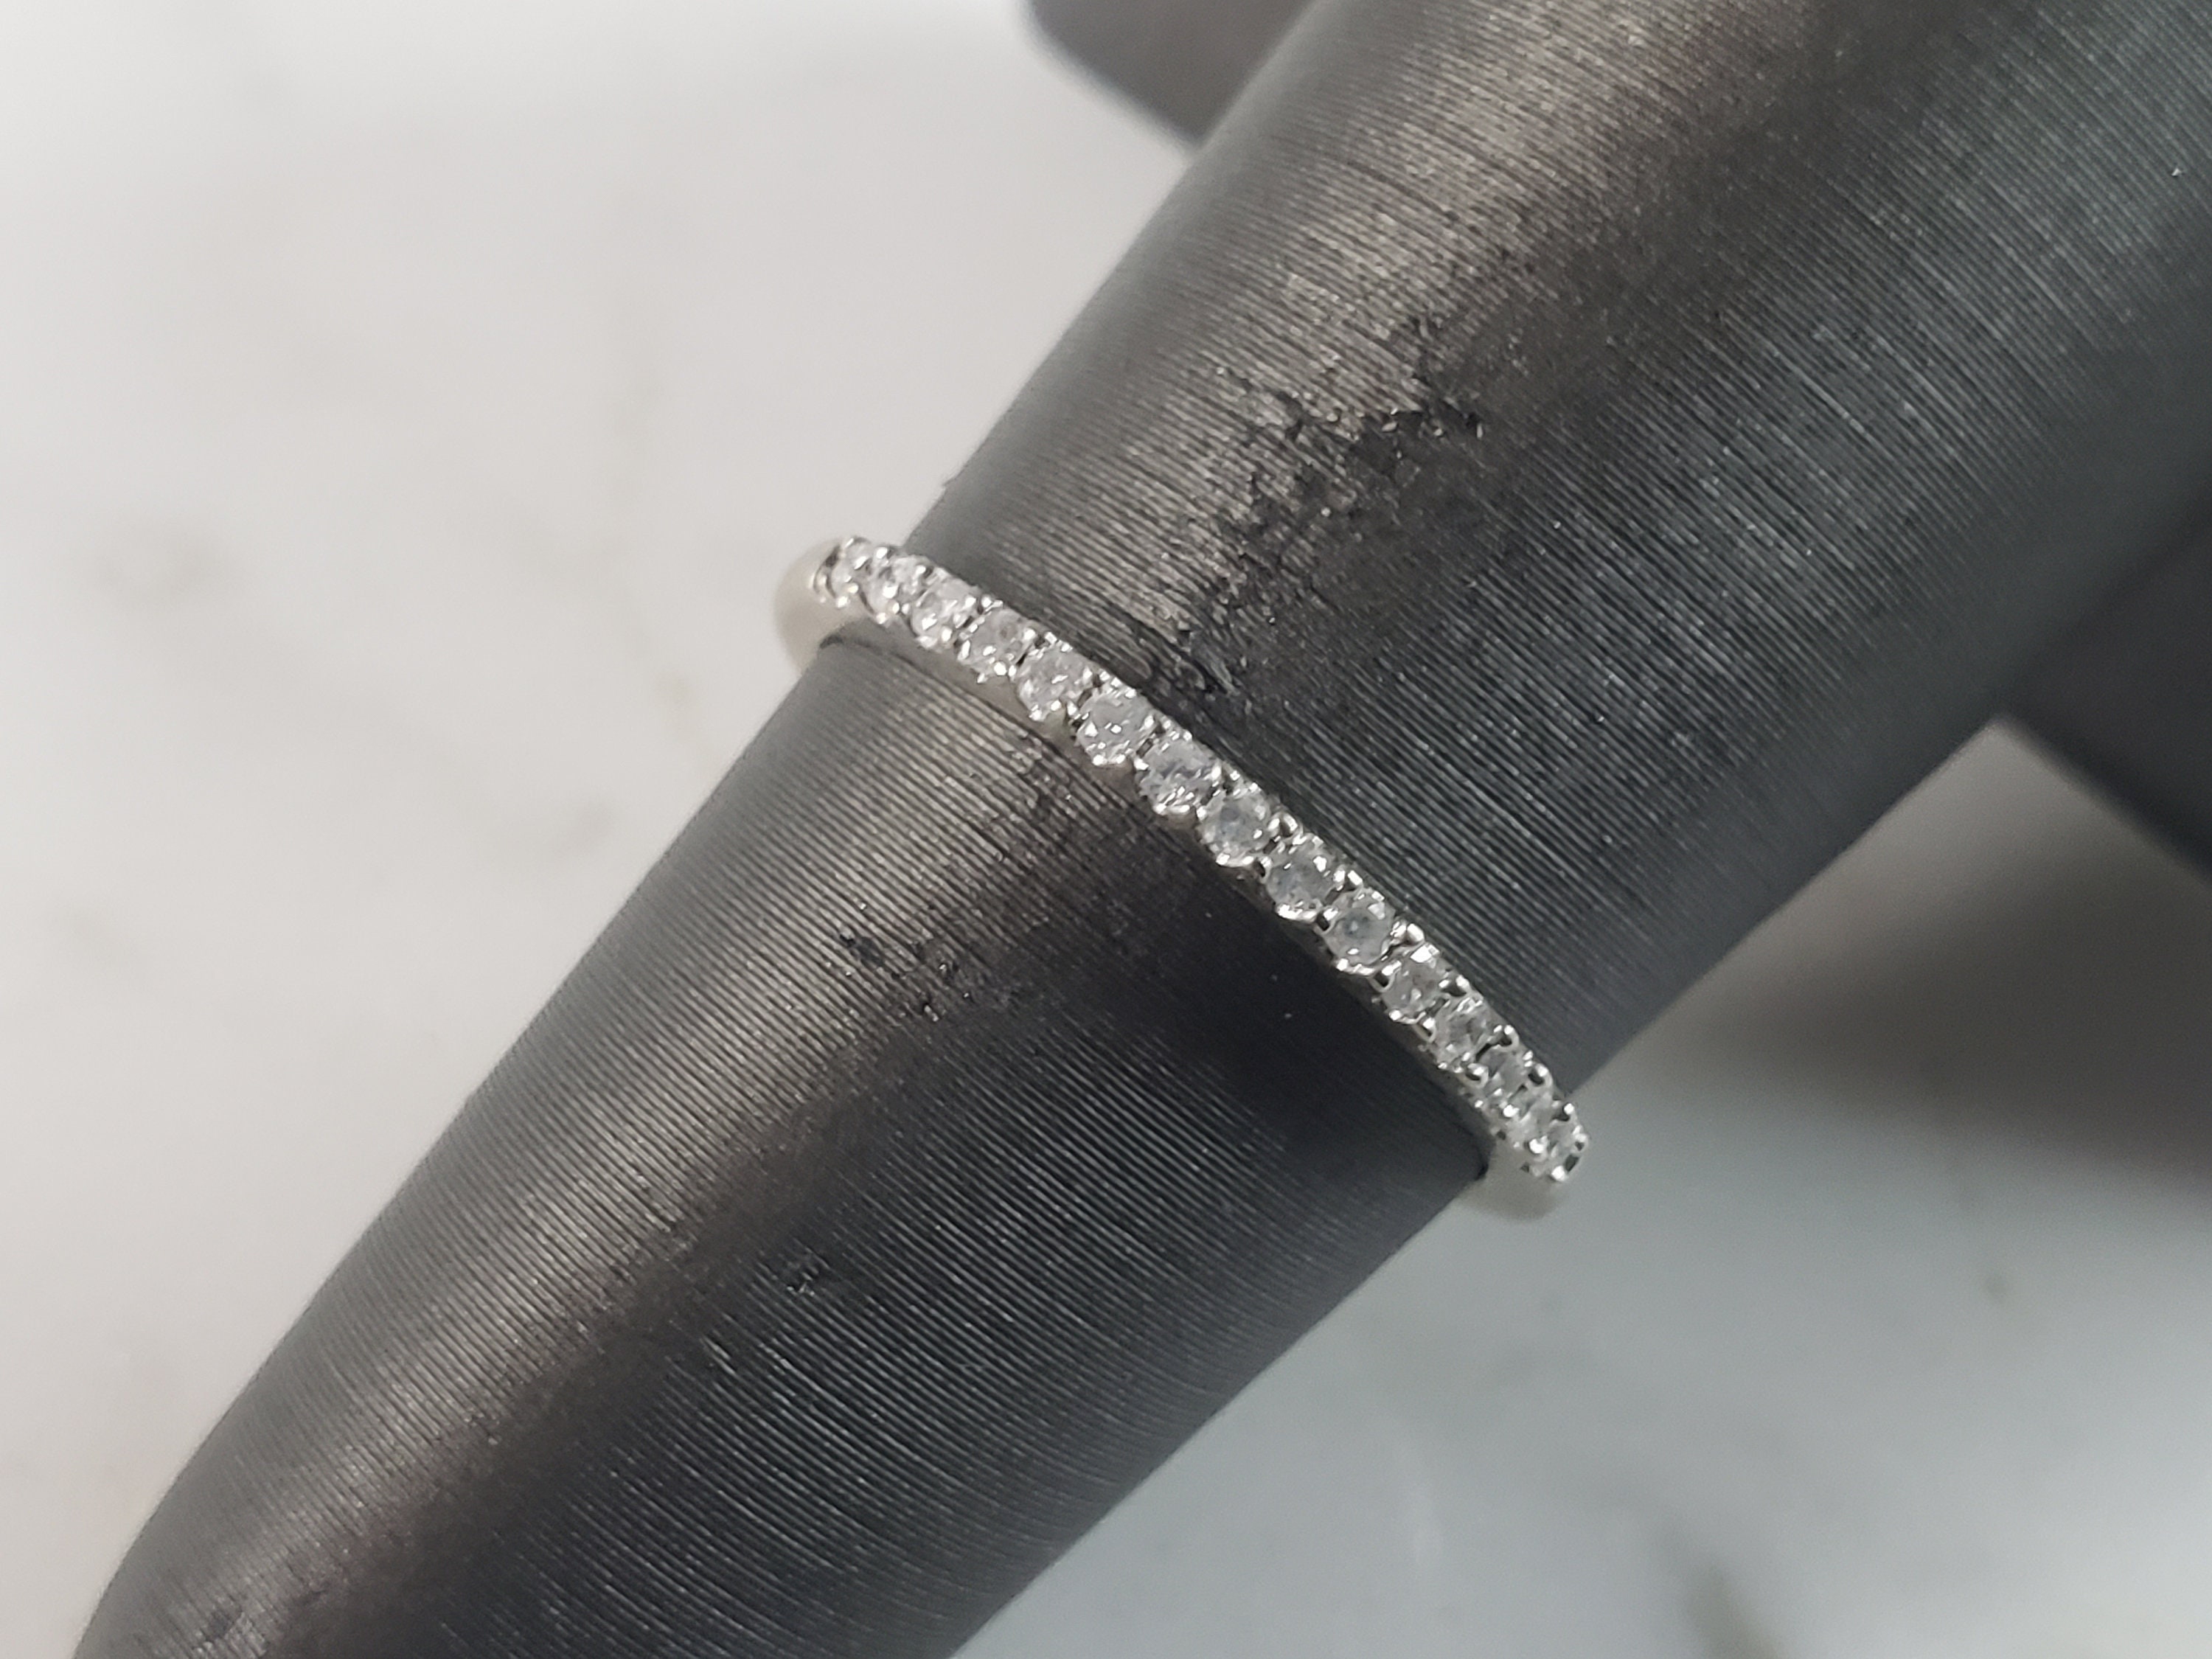 shop stores Adjustable Sterling Double Double Ring, linked, rings Curved  Ring, Silver Sterling multi-finger Silver chain Ring, Ring Open Ring,  Everyday Ring, Double Ring, Textured Ring, Minimalist Ring 